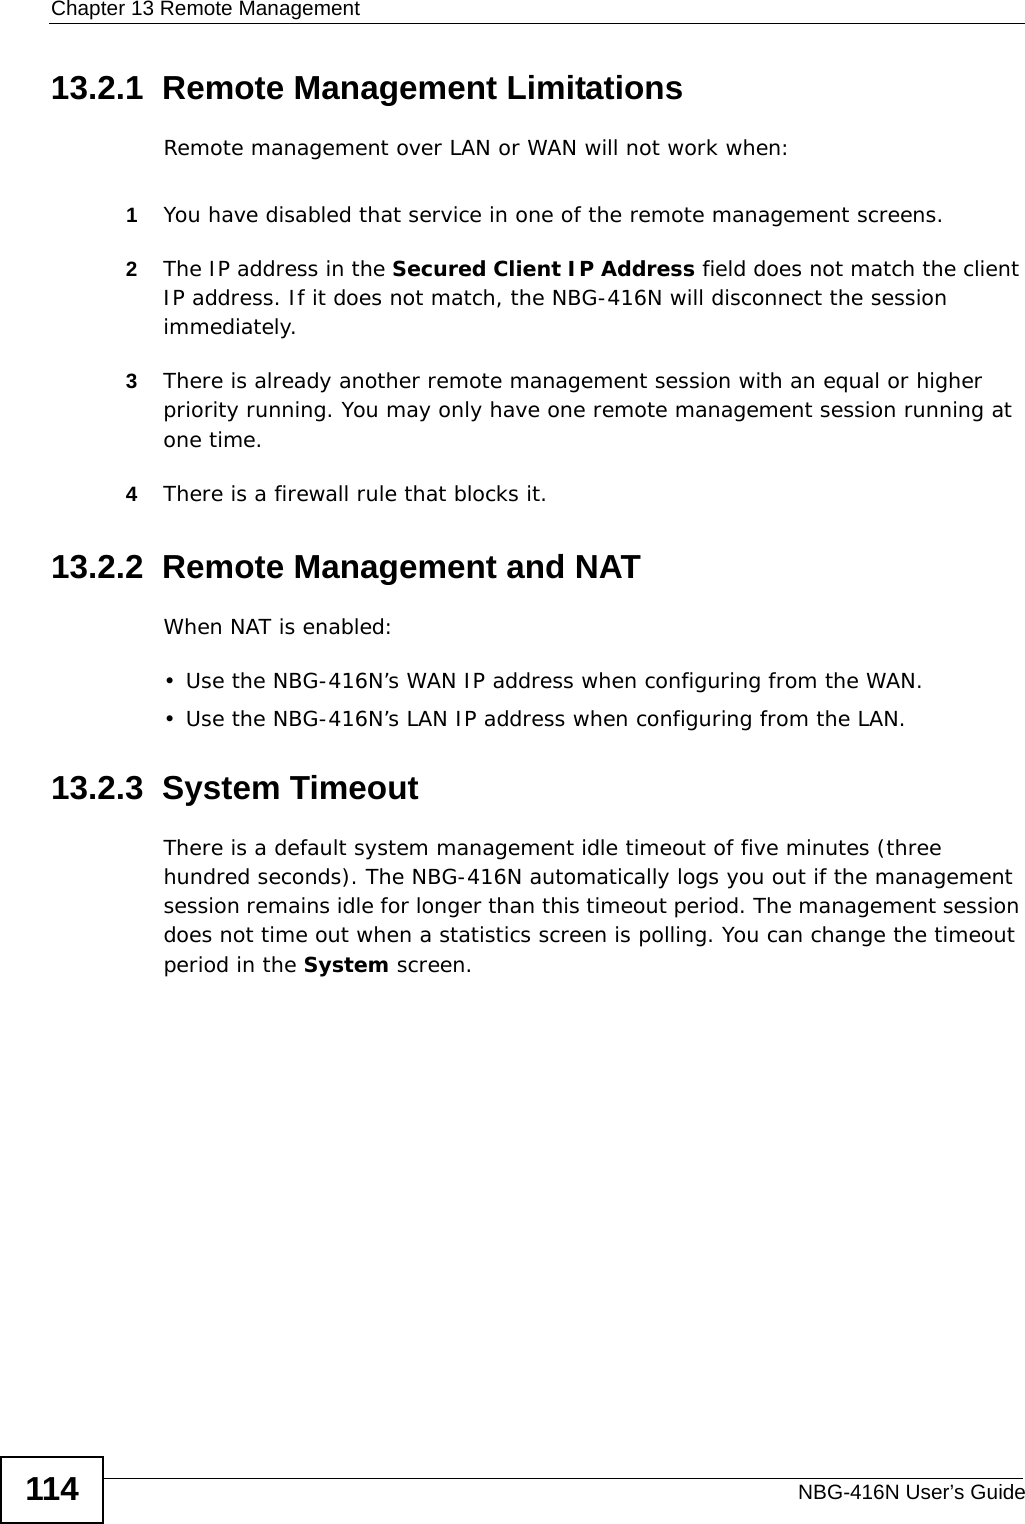 Chapter 13 Remote ManagementNBG-416N User’s Guide11413.2.1  Remote Management LimitationsRemote management over LAN or WAN will not work when:1You have disabled that service in one of the remote management screens.2The IP address in the Secured Client IP Address field does not match the client IP address. If it does not match, the NBG-416N will disconnect the session immediately.3There is already another remote management session with an equal or higher priority running. You may only have one remote management session running at one time.4There is a firewall rule that blocks it.13.2.2  Remote Management and NATWhen NAT is enabled:• Use the NBG-416N’s WAN IP address when configuring from the WAN. • Use the NBG-416N’s LAN IP address when configuring from the LAN.13.2.3  System TimeoutThere is a default system management idle timeout of five minutes (three hundred seconds). The NBG-416N automatically logs you out if the management session remains idle for longer than this timeout period. The management session does not time out when a statistics screen is polling. You can change the timeout period in the System screen.